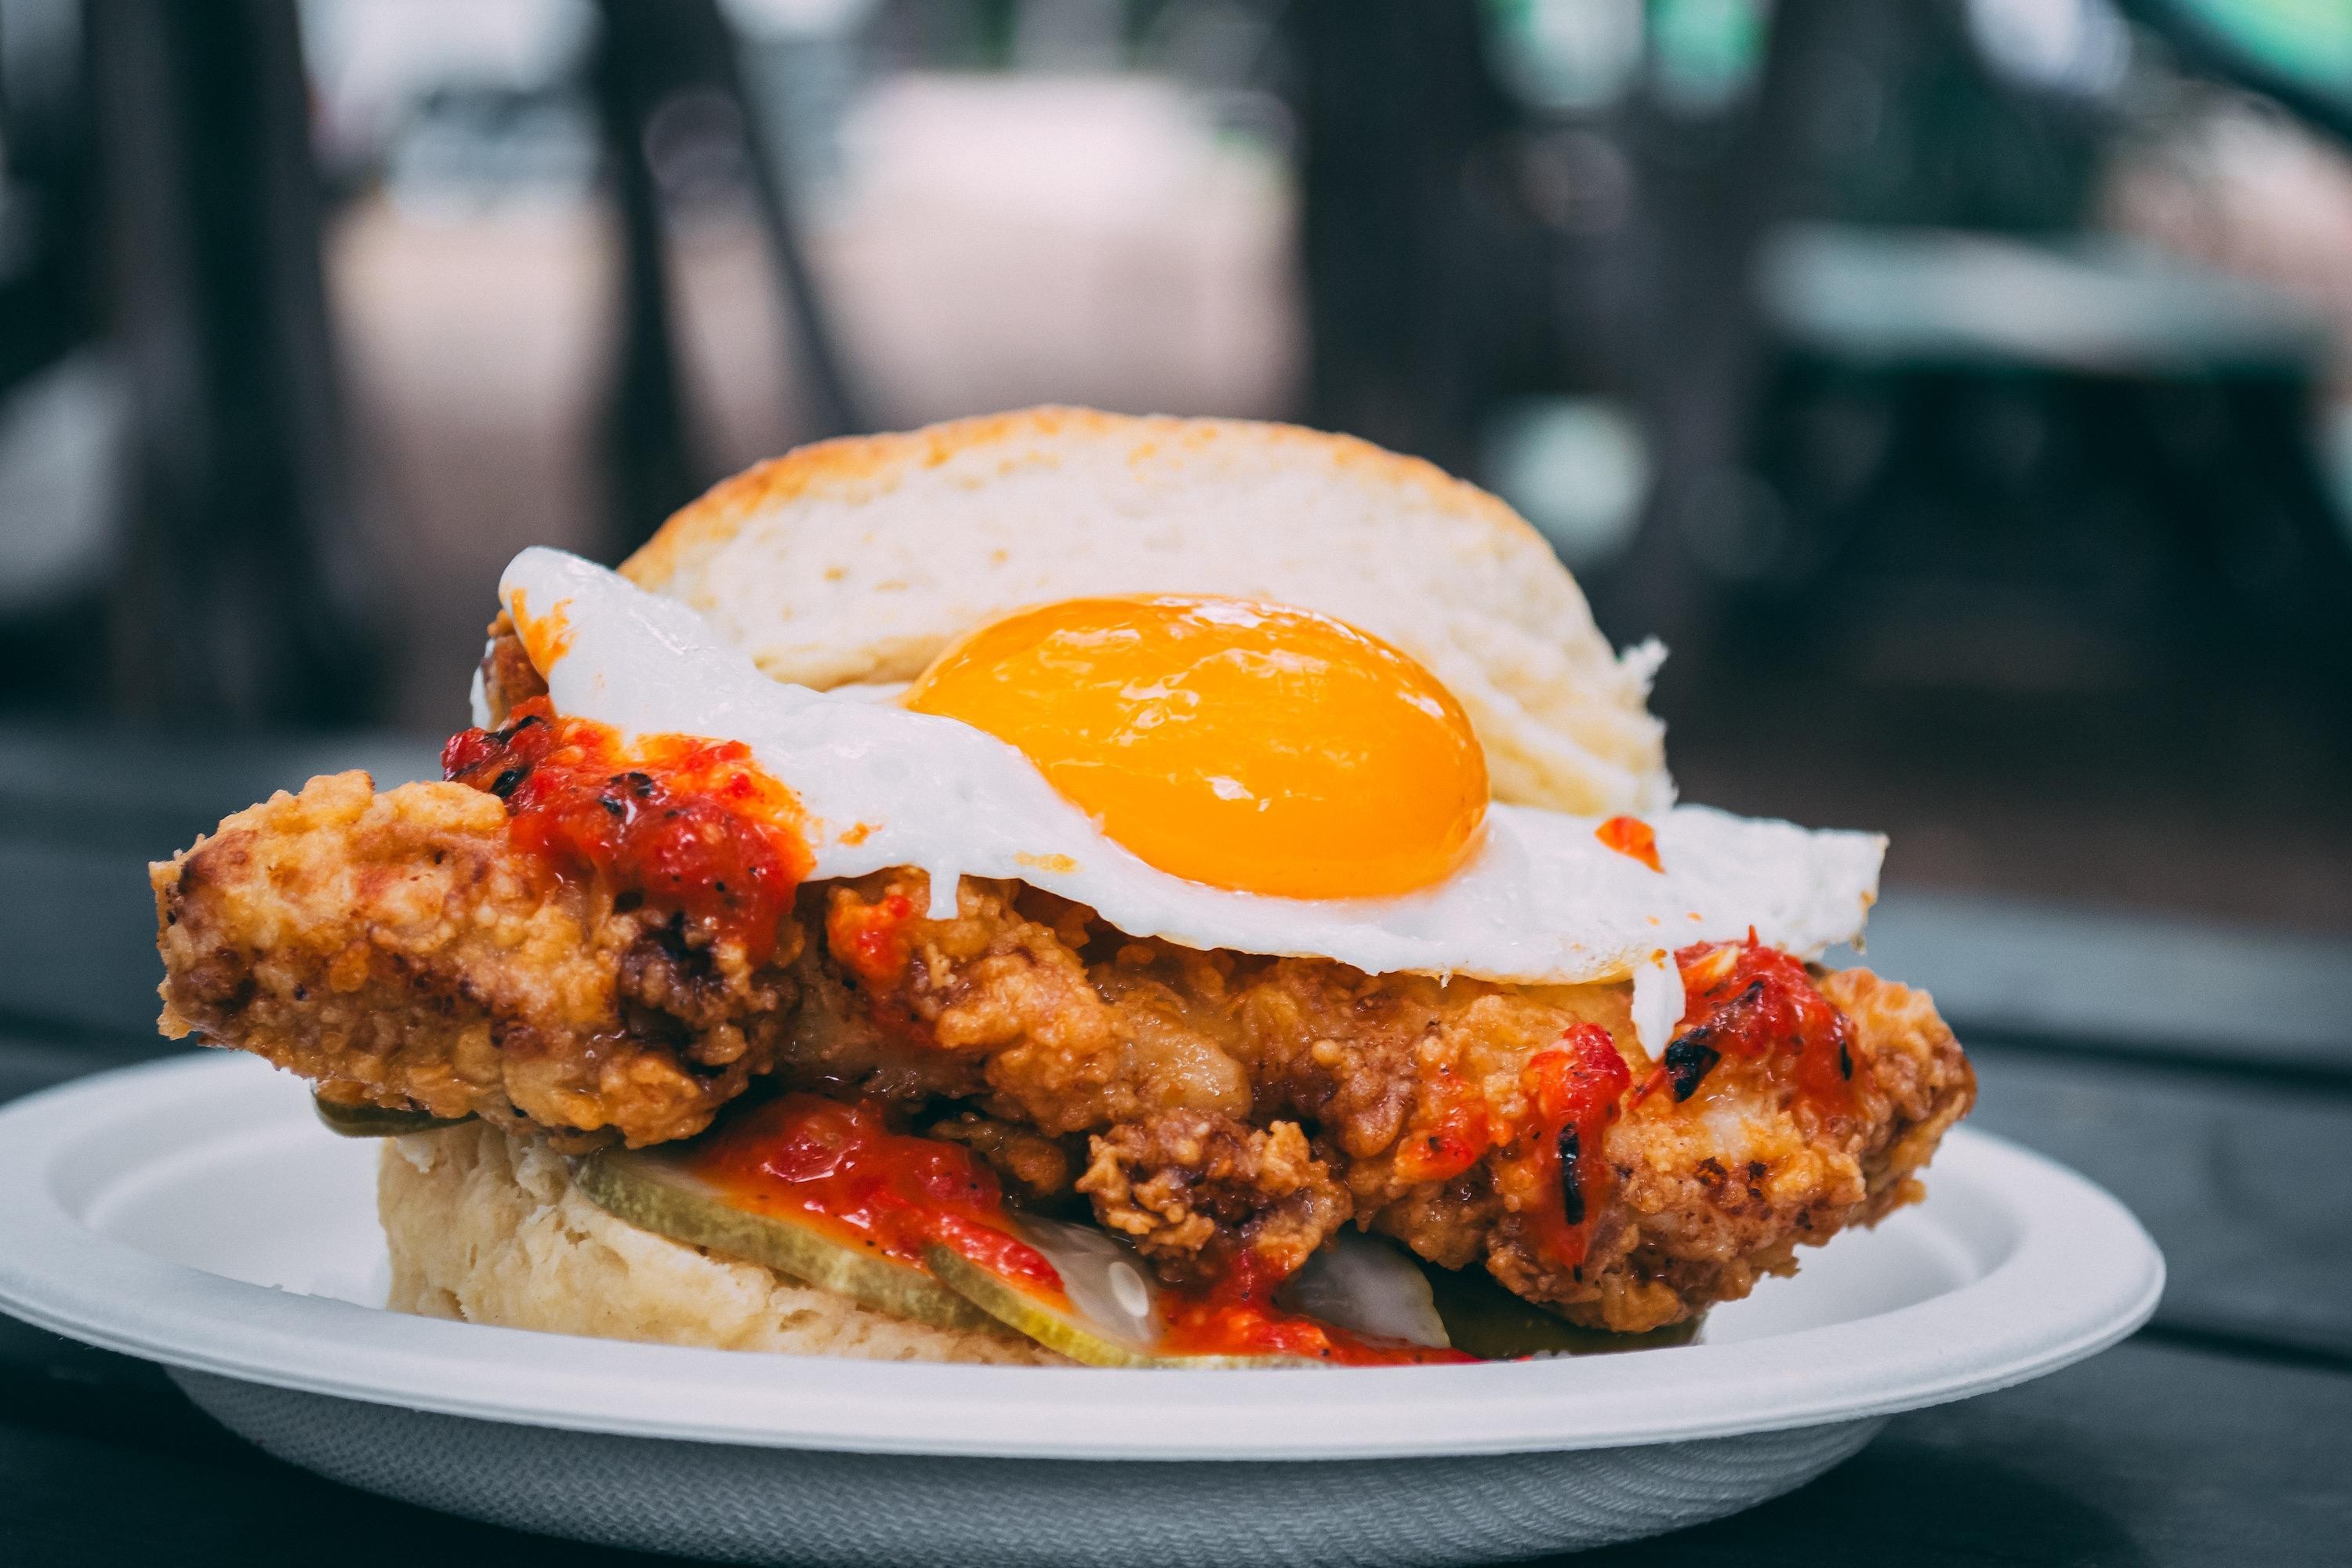 Sweet Heat Sauce, Buttermilk Fried Chicken, Sunny Egg, Pickles, Egg On A Biscuit